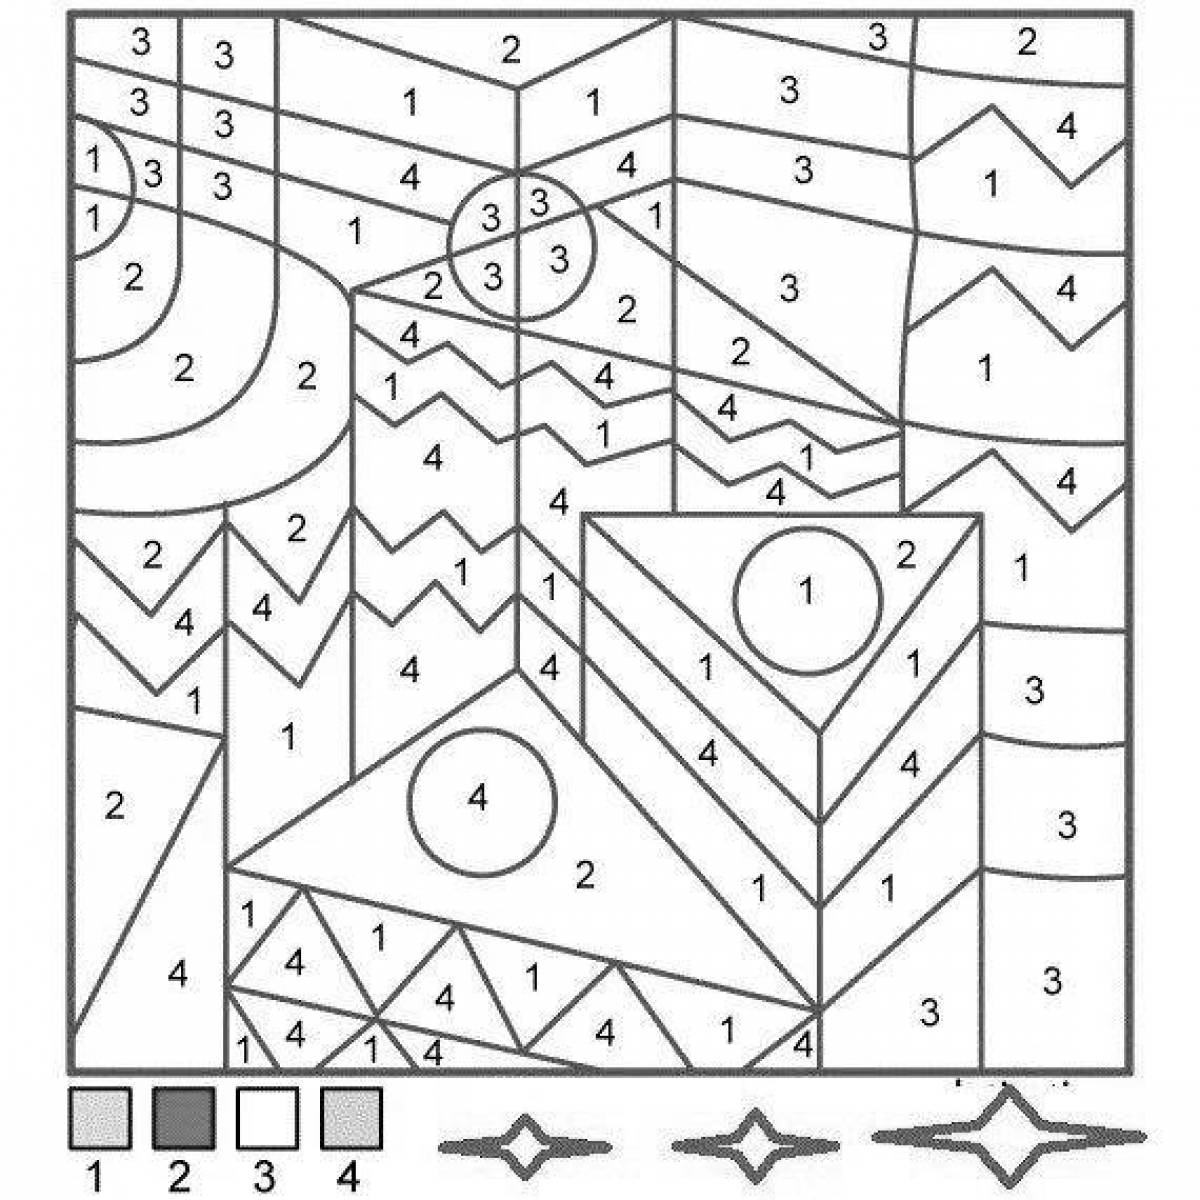 Fun coloring game by numbers and cells